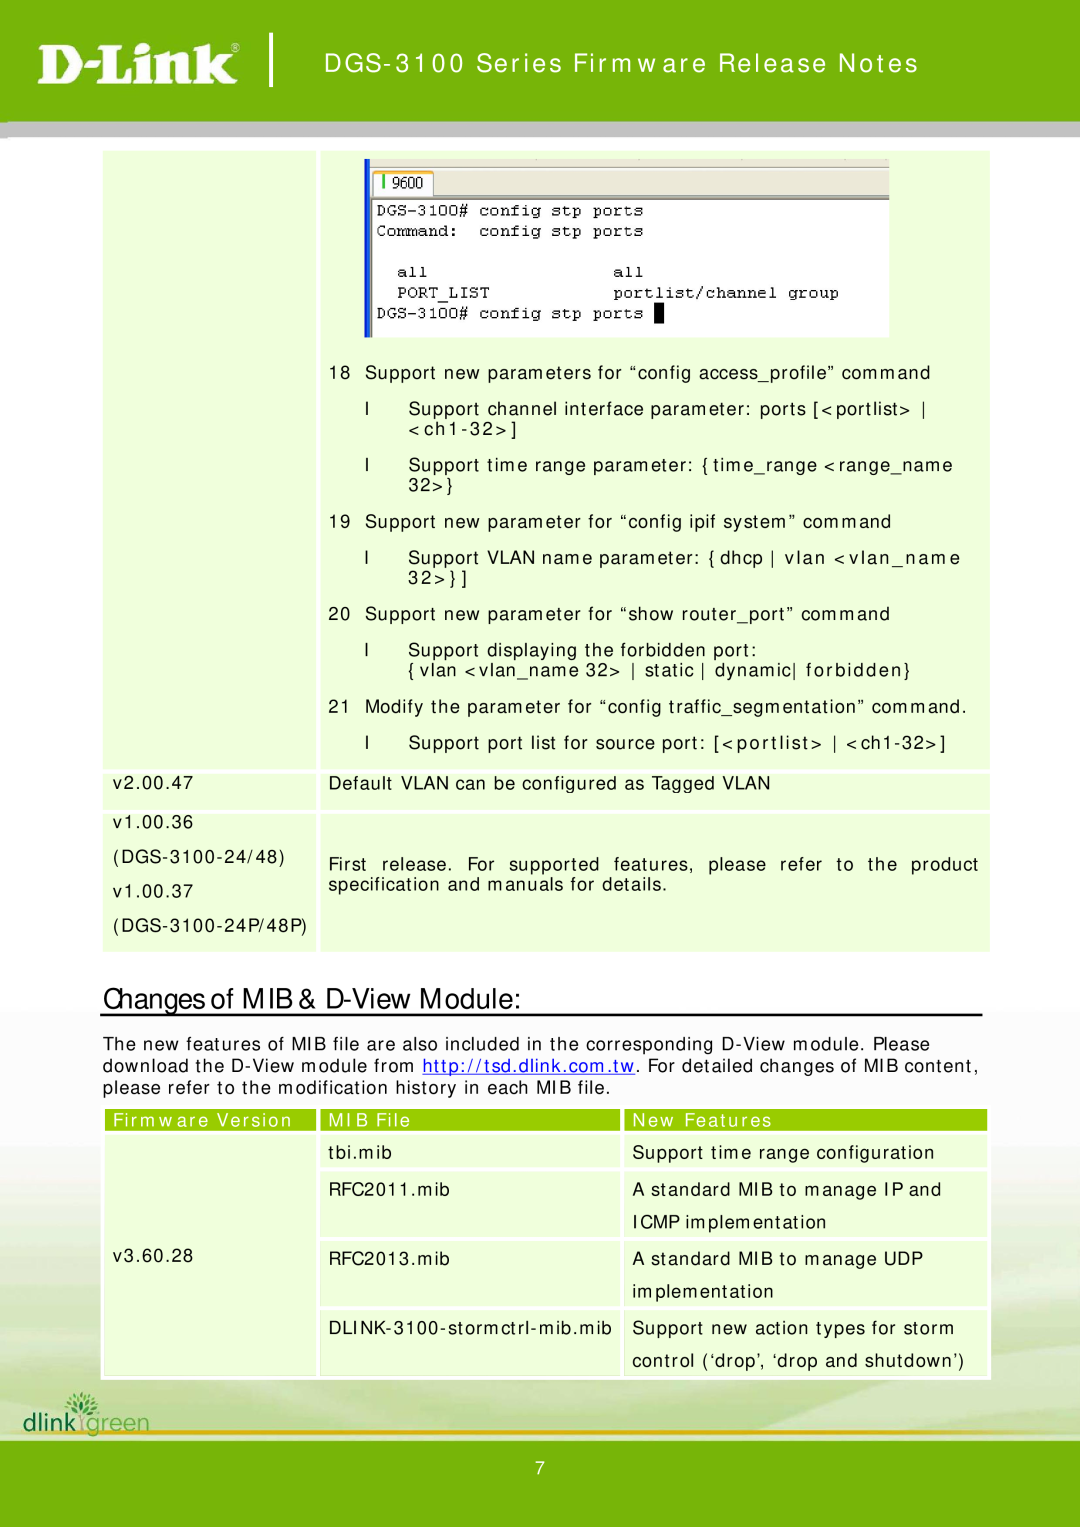 D-Link 3.60.28 Changes of MIB & D-View Module, ch1-32, MIB File, DGS-3100 Series Firmware Release Notes, Firmware Version 